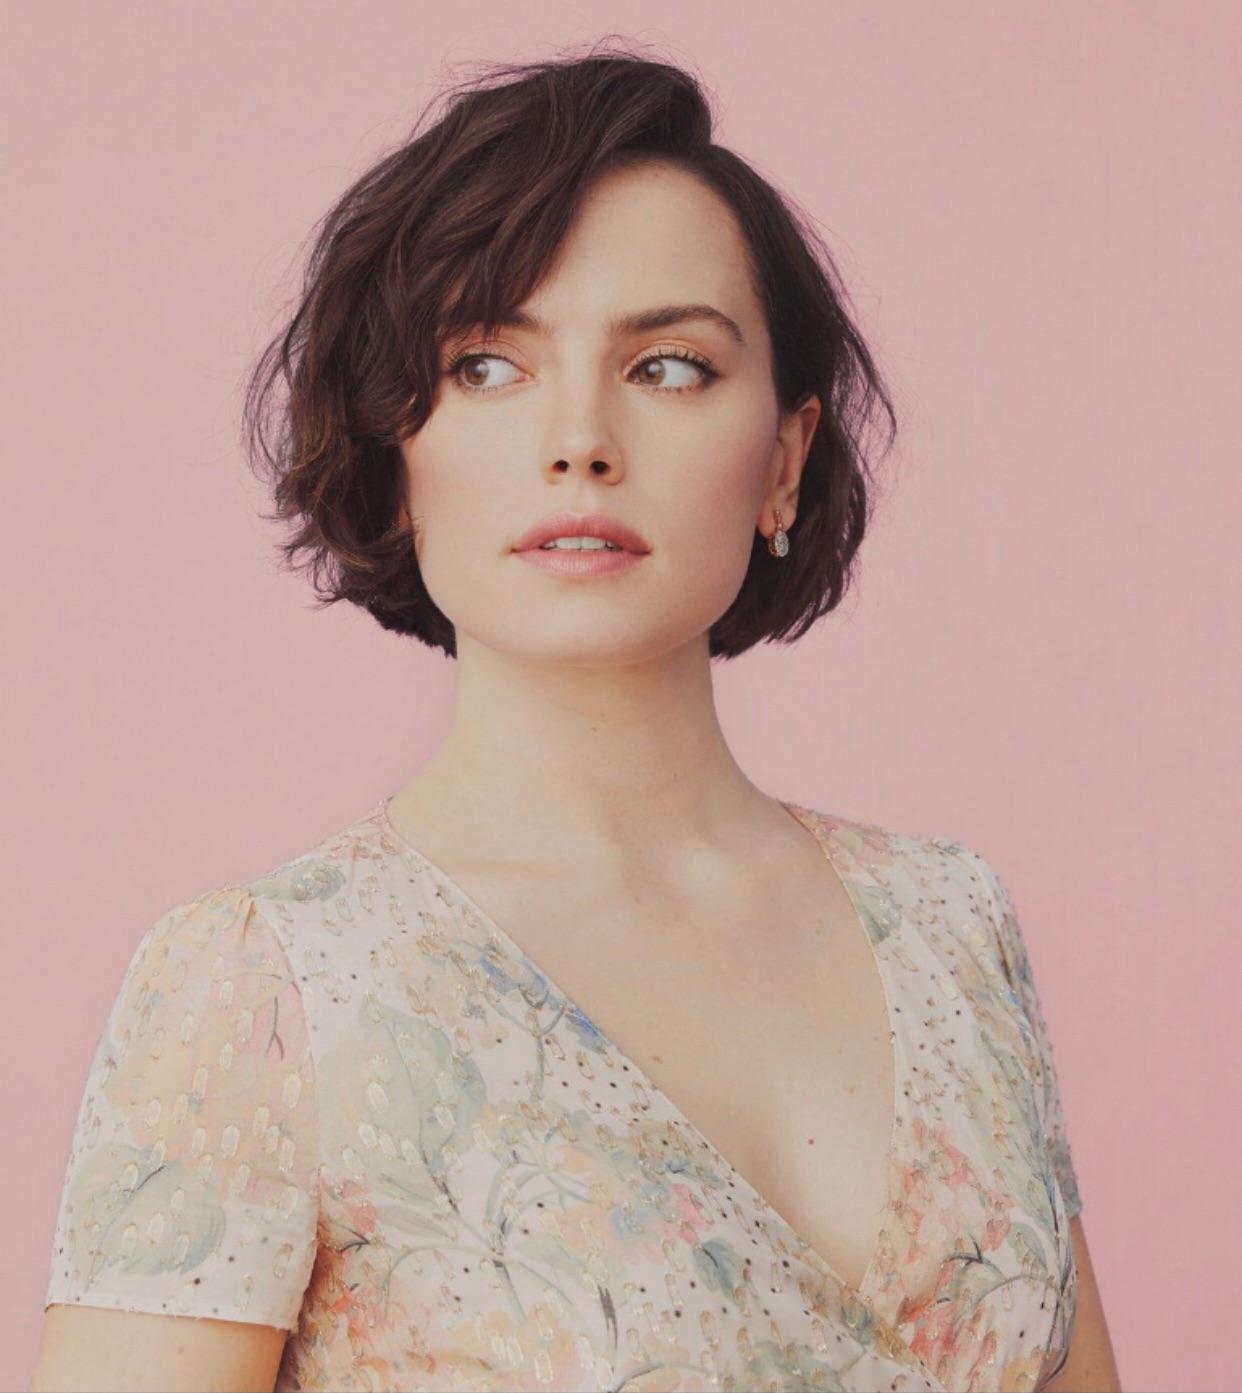 Daisy Ridley Is Easily One Of The Most Beautiful Women In The World